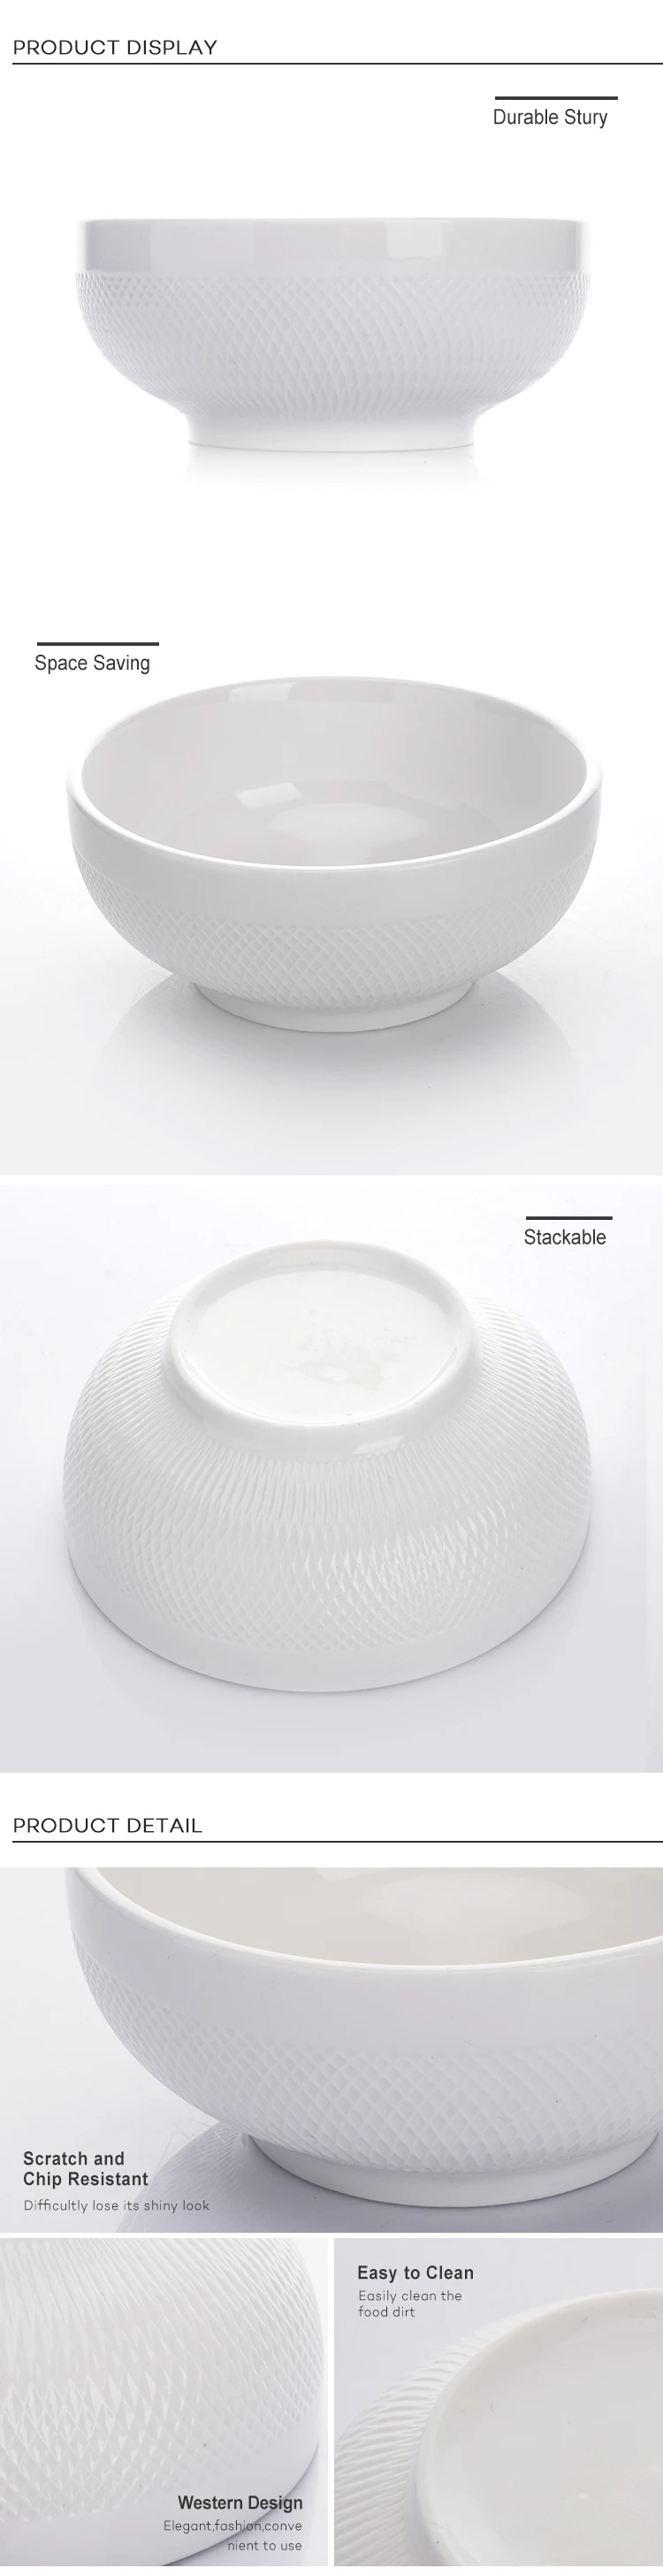 Wholesale Fashionset cereal rice ceramic bowl ,Ceramics Round Salad Bowl,The Dinner Bowl for Restaurant or Hotel